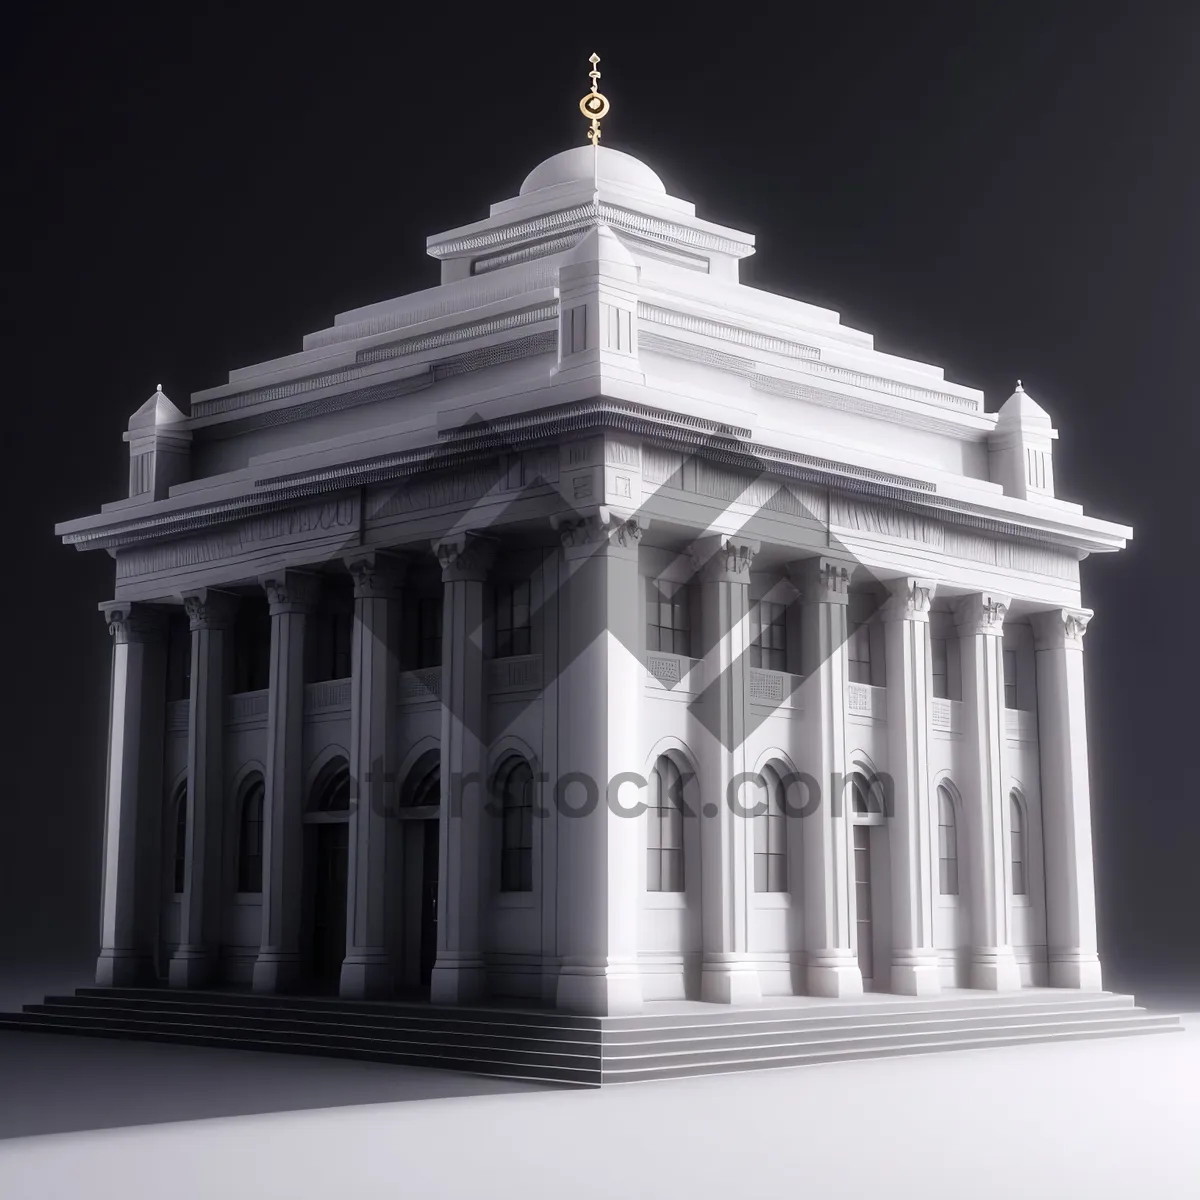 Picture of Majestic Government Building with Iconic Columns